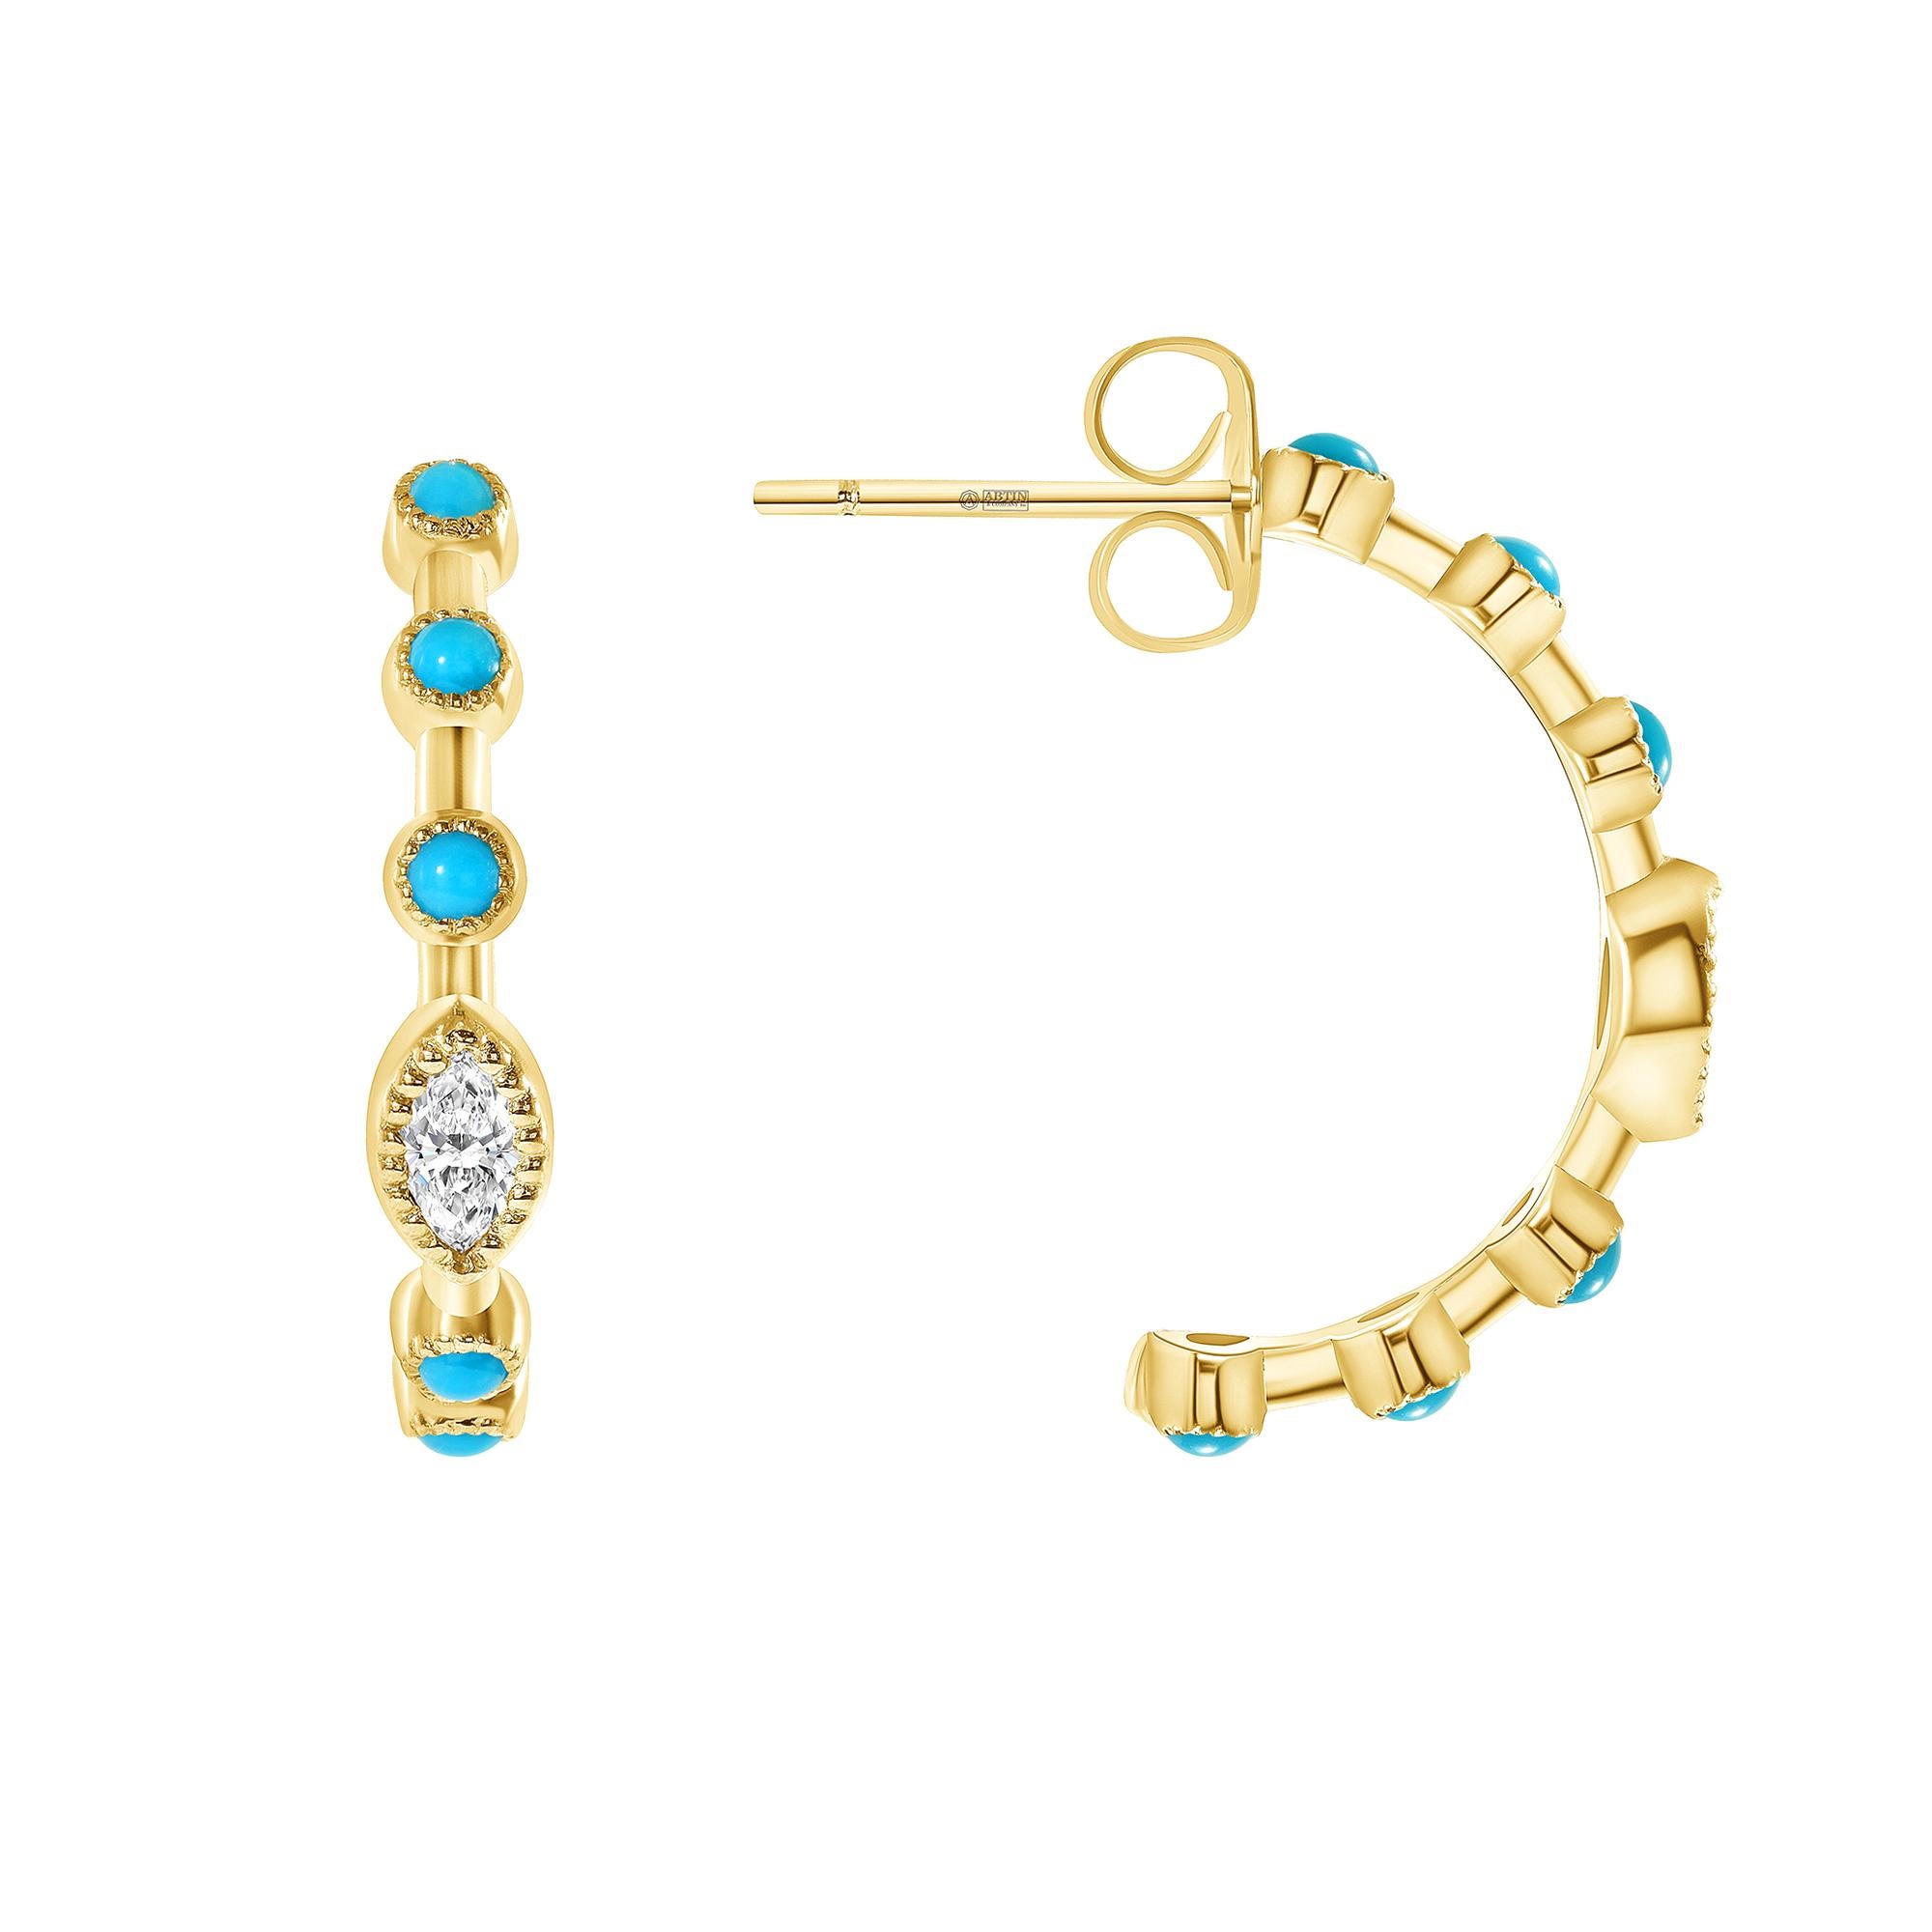  Enhance your style with this eye-catching hoop earring adorned with dazzling marquise diamonds complemented by glossy bezel-set turquoise gemstones in elegant 14K gold.
Gold Weight: 2.00 gr.
Diamond Weight: 0.16 ct
Turquoise: 0.35 ct
Available in